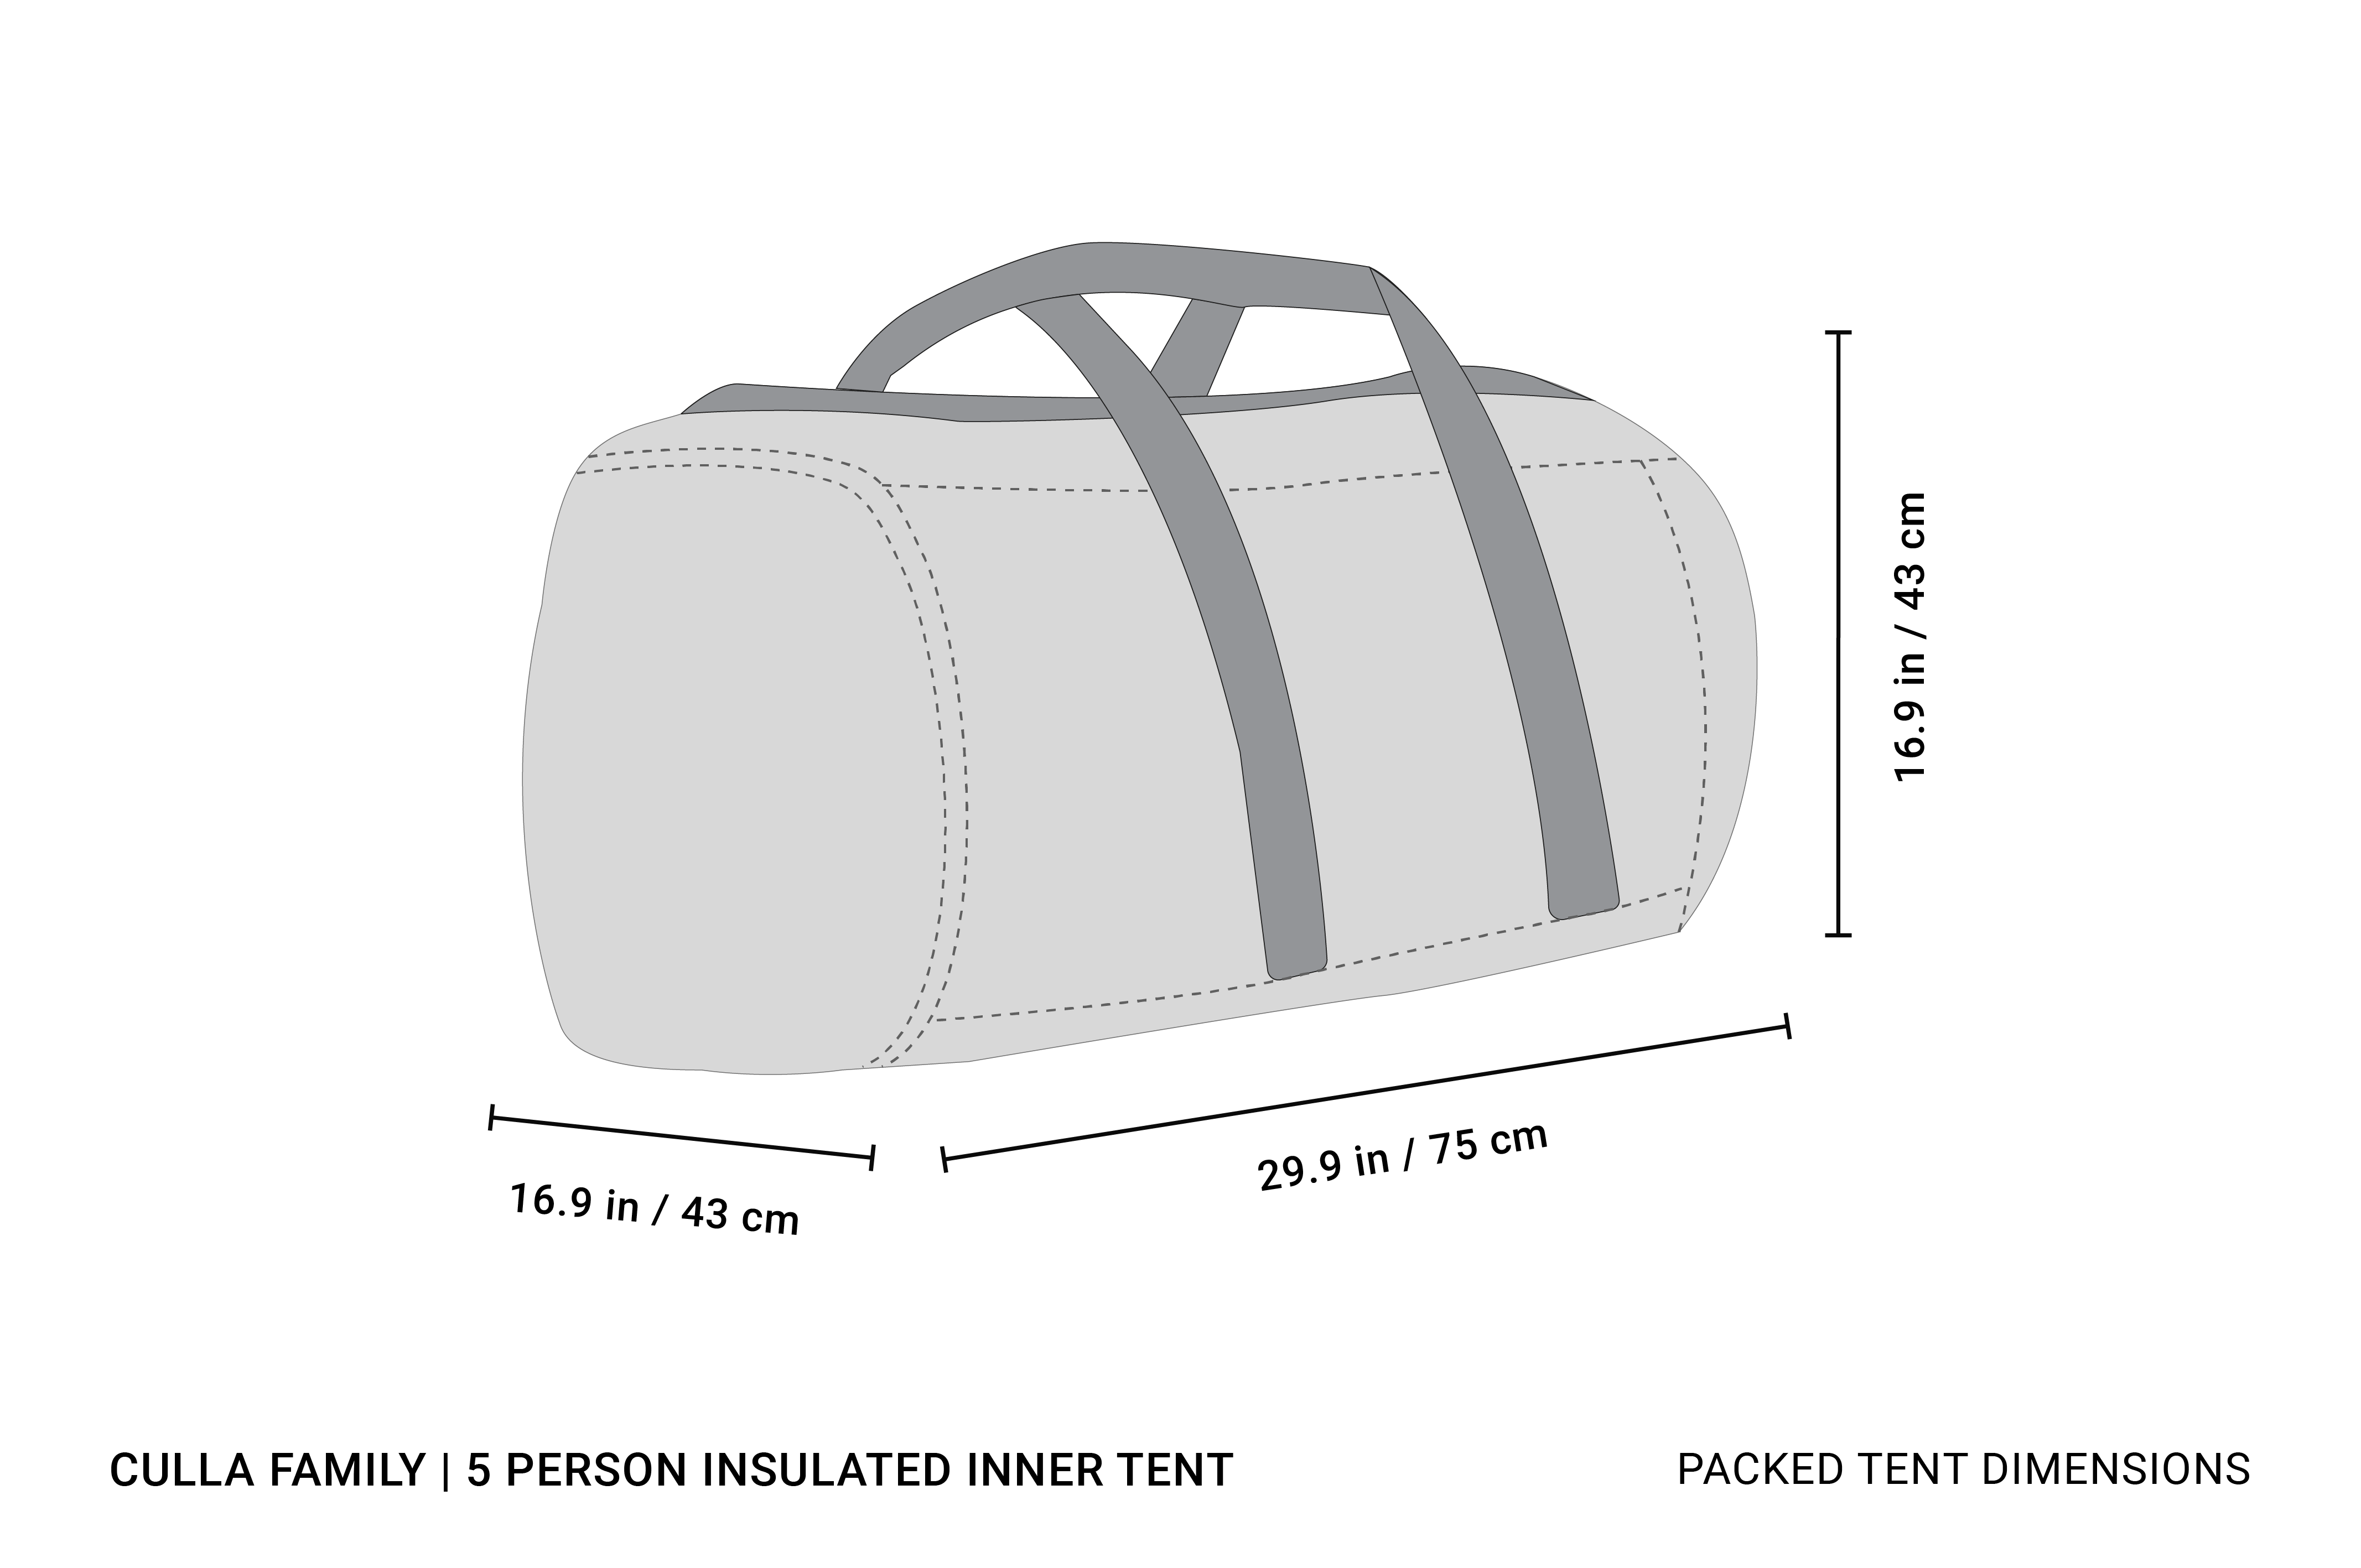 CULLA FAMILY | 5 PERSON INSULATED INNER TENT